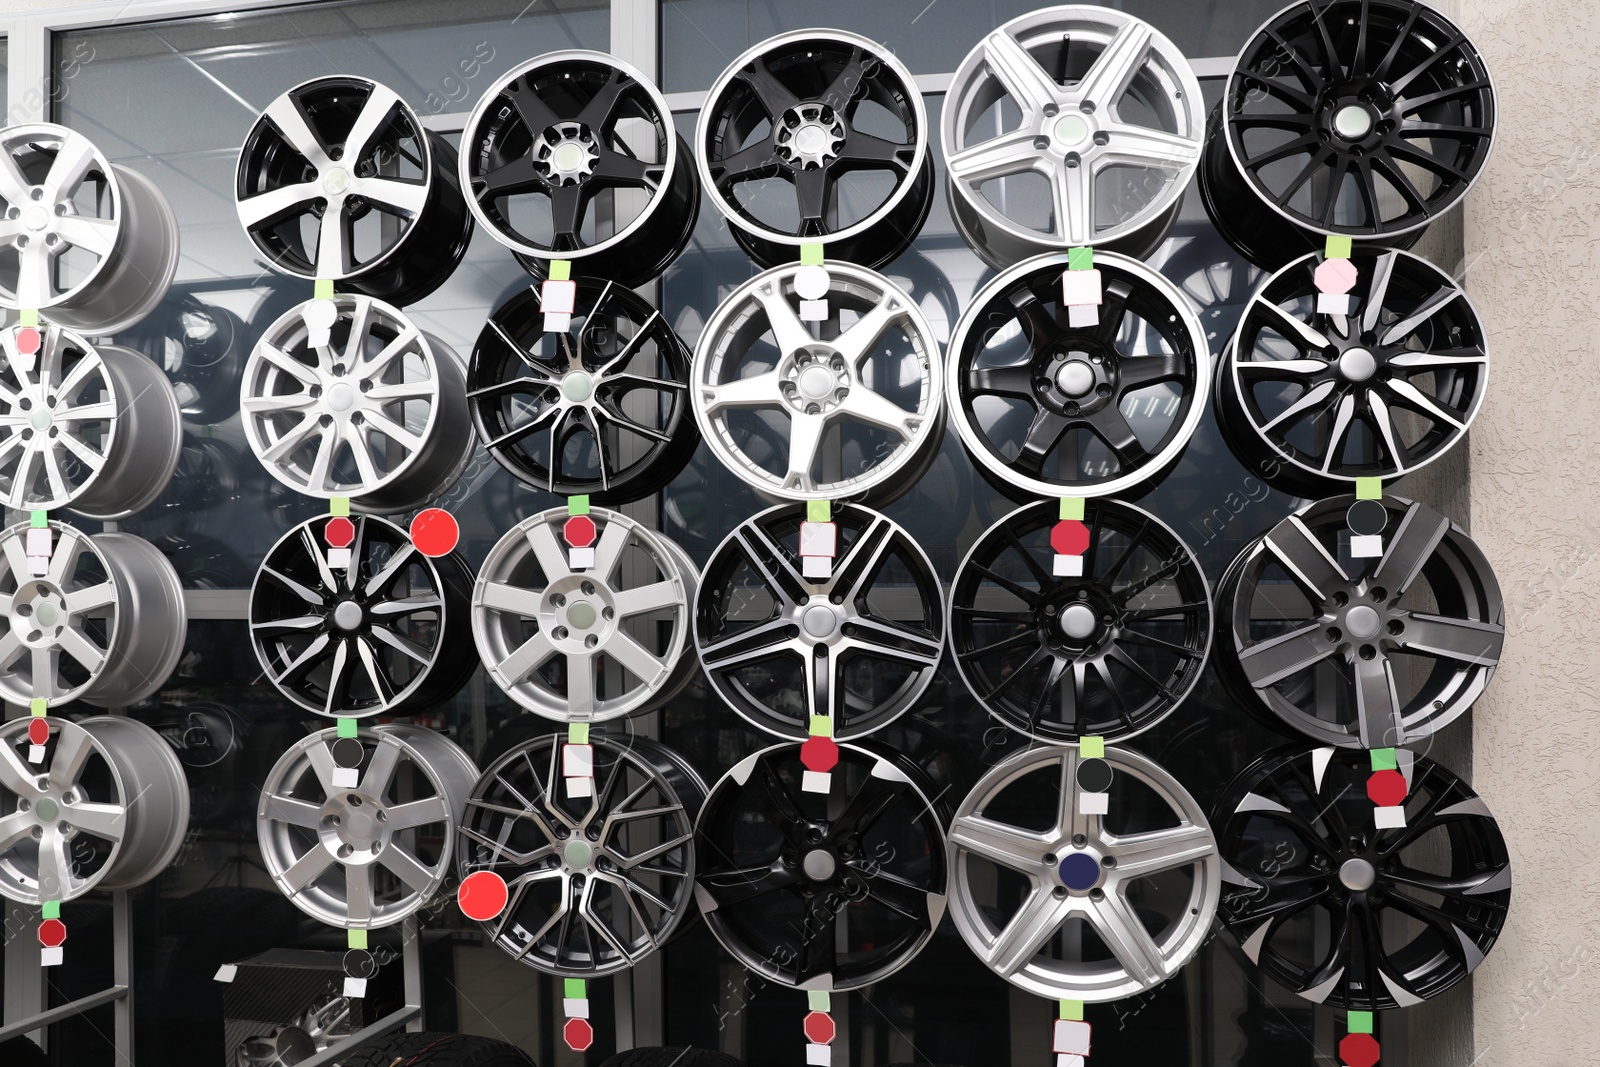 Image of Alloy wheels on display in auto store